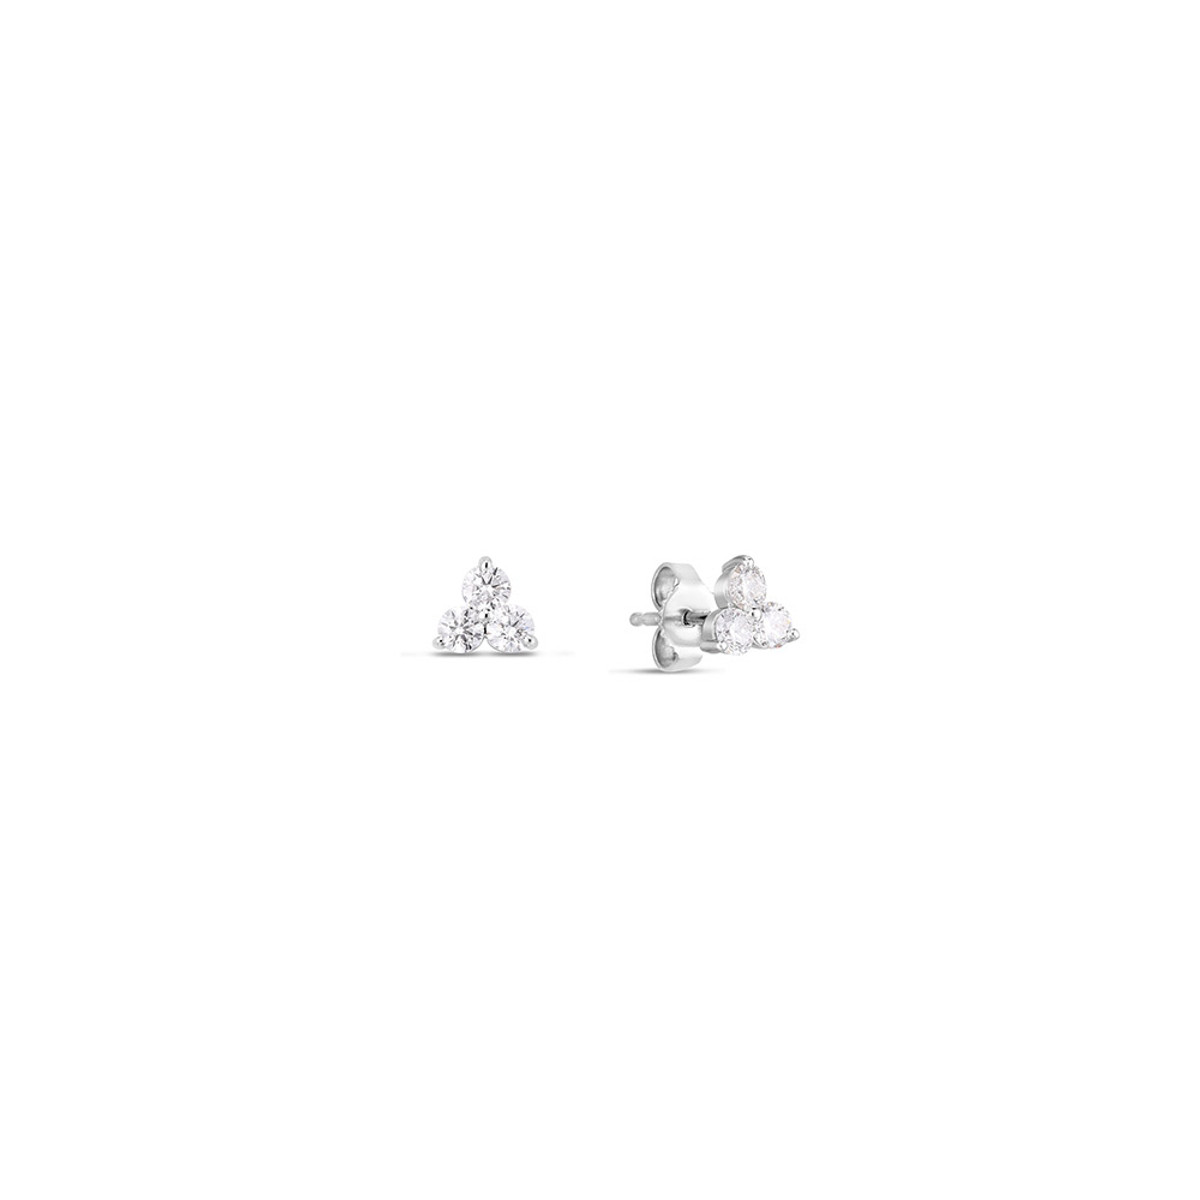 Roberto Coin 18K White Gold Diamond 3 Stone Cluster Stud Earrings-39800 Product Image